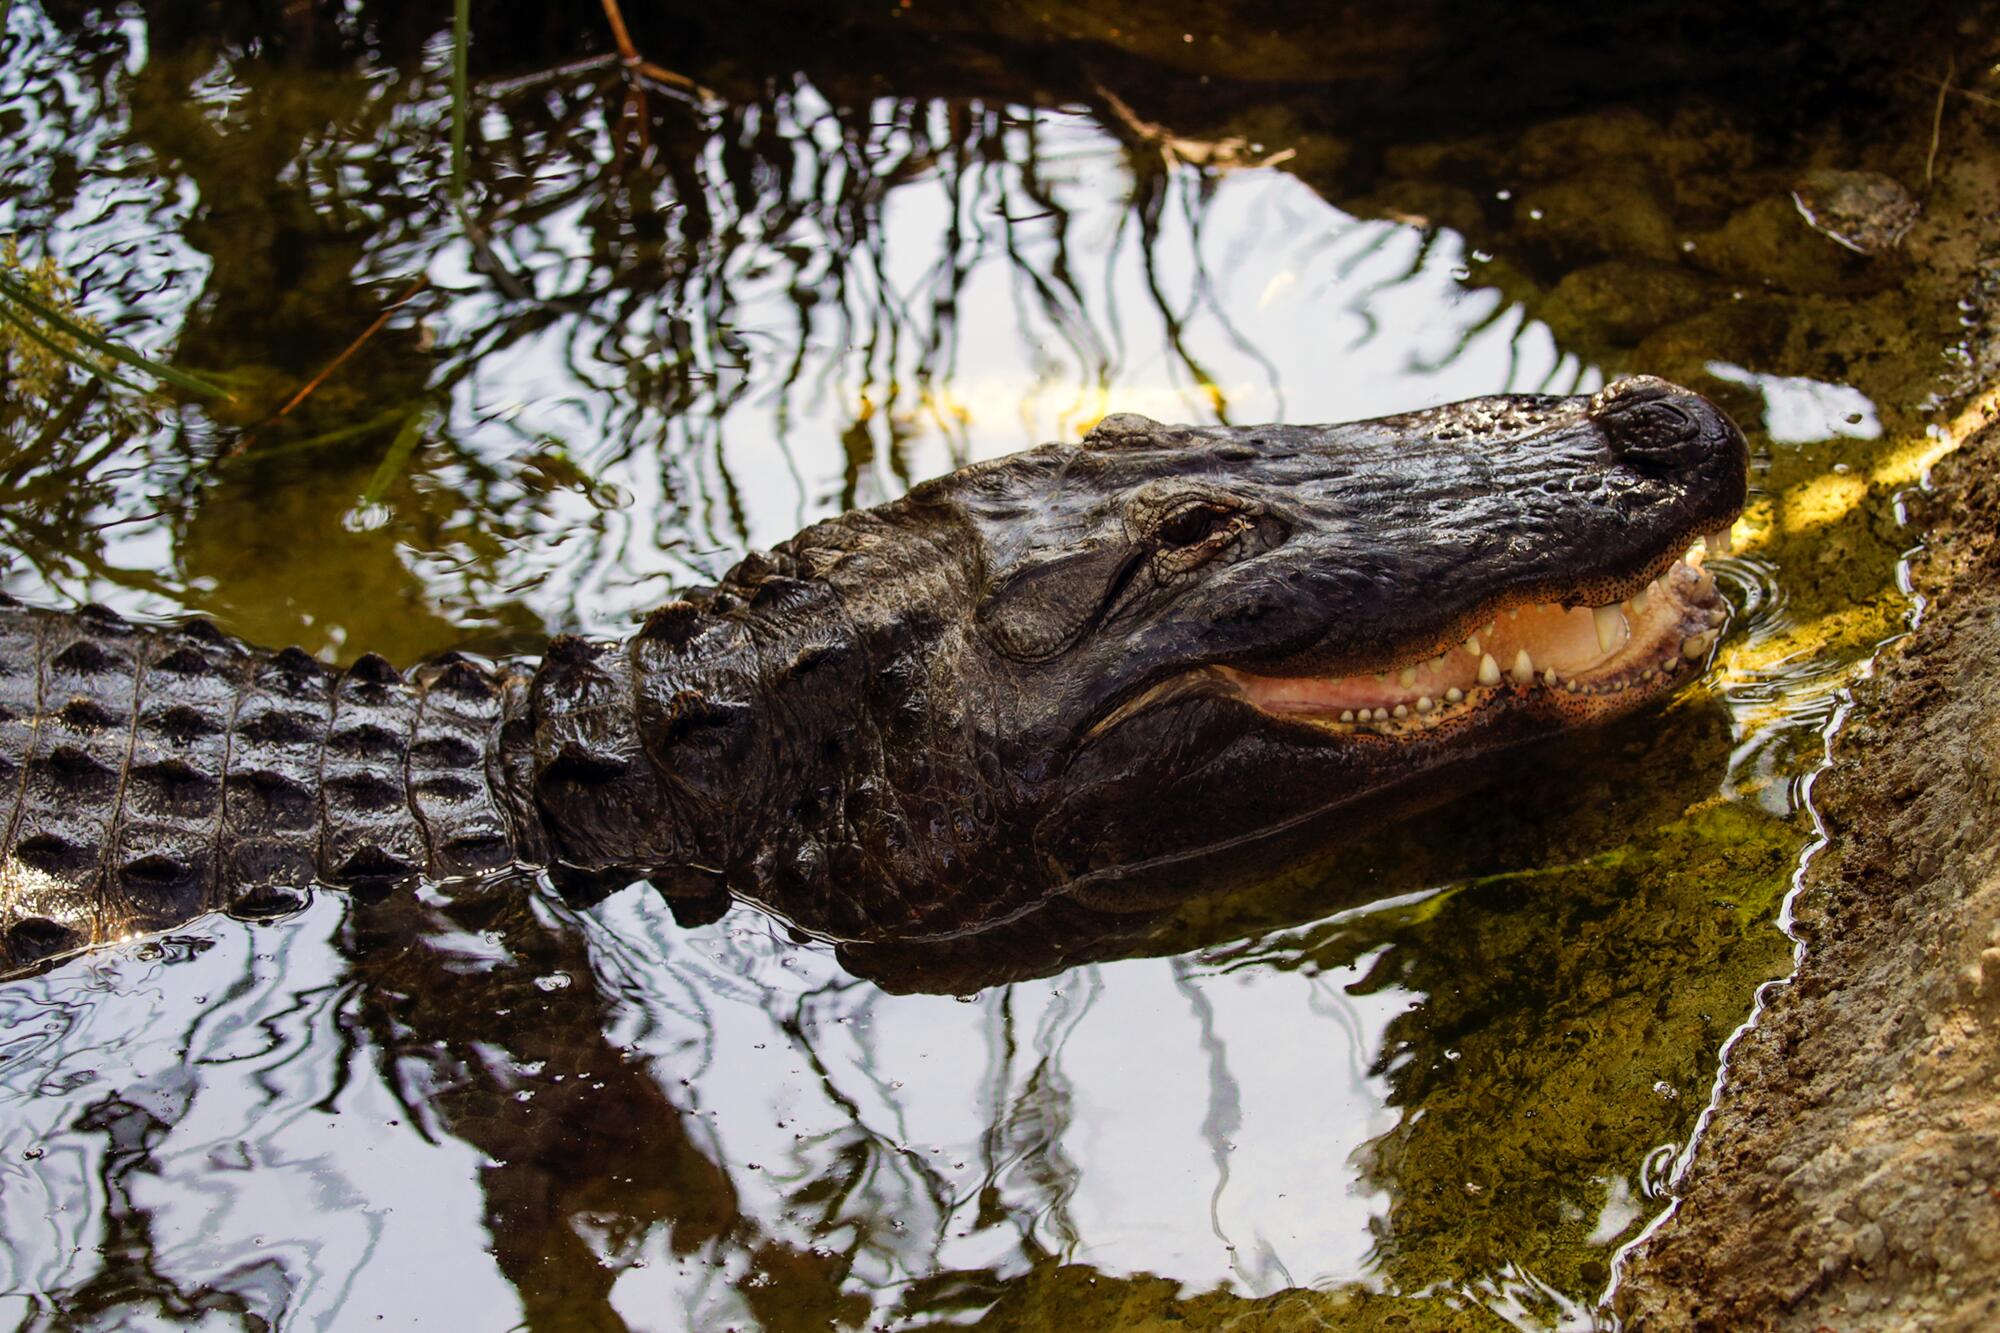 Reggie the Alligator in his home at the L.A. Zoo.